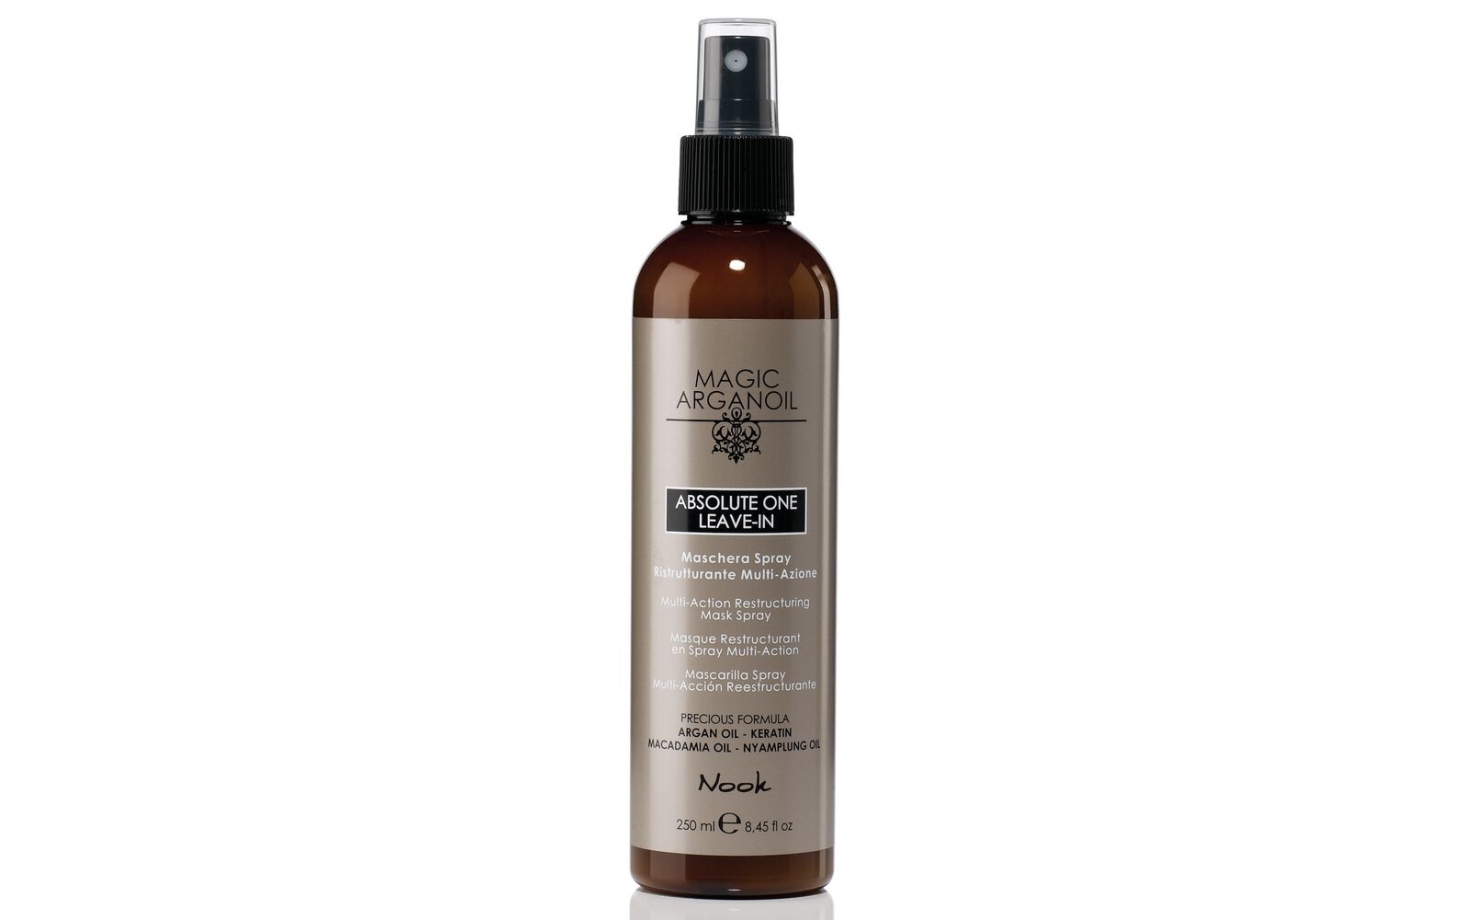 Nook Magic Arganoil Absolute One Leave-in Spray